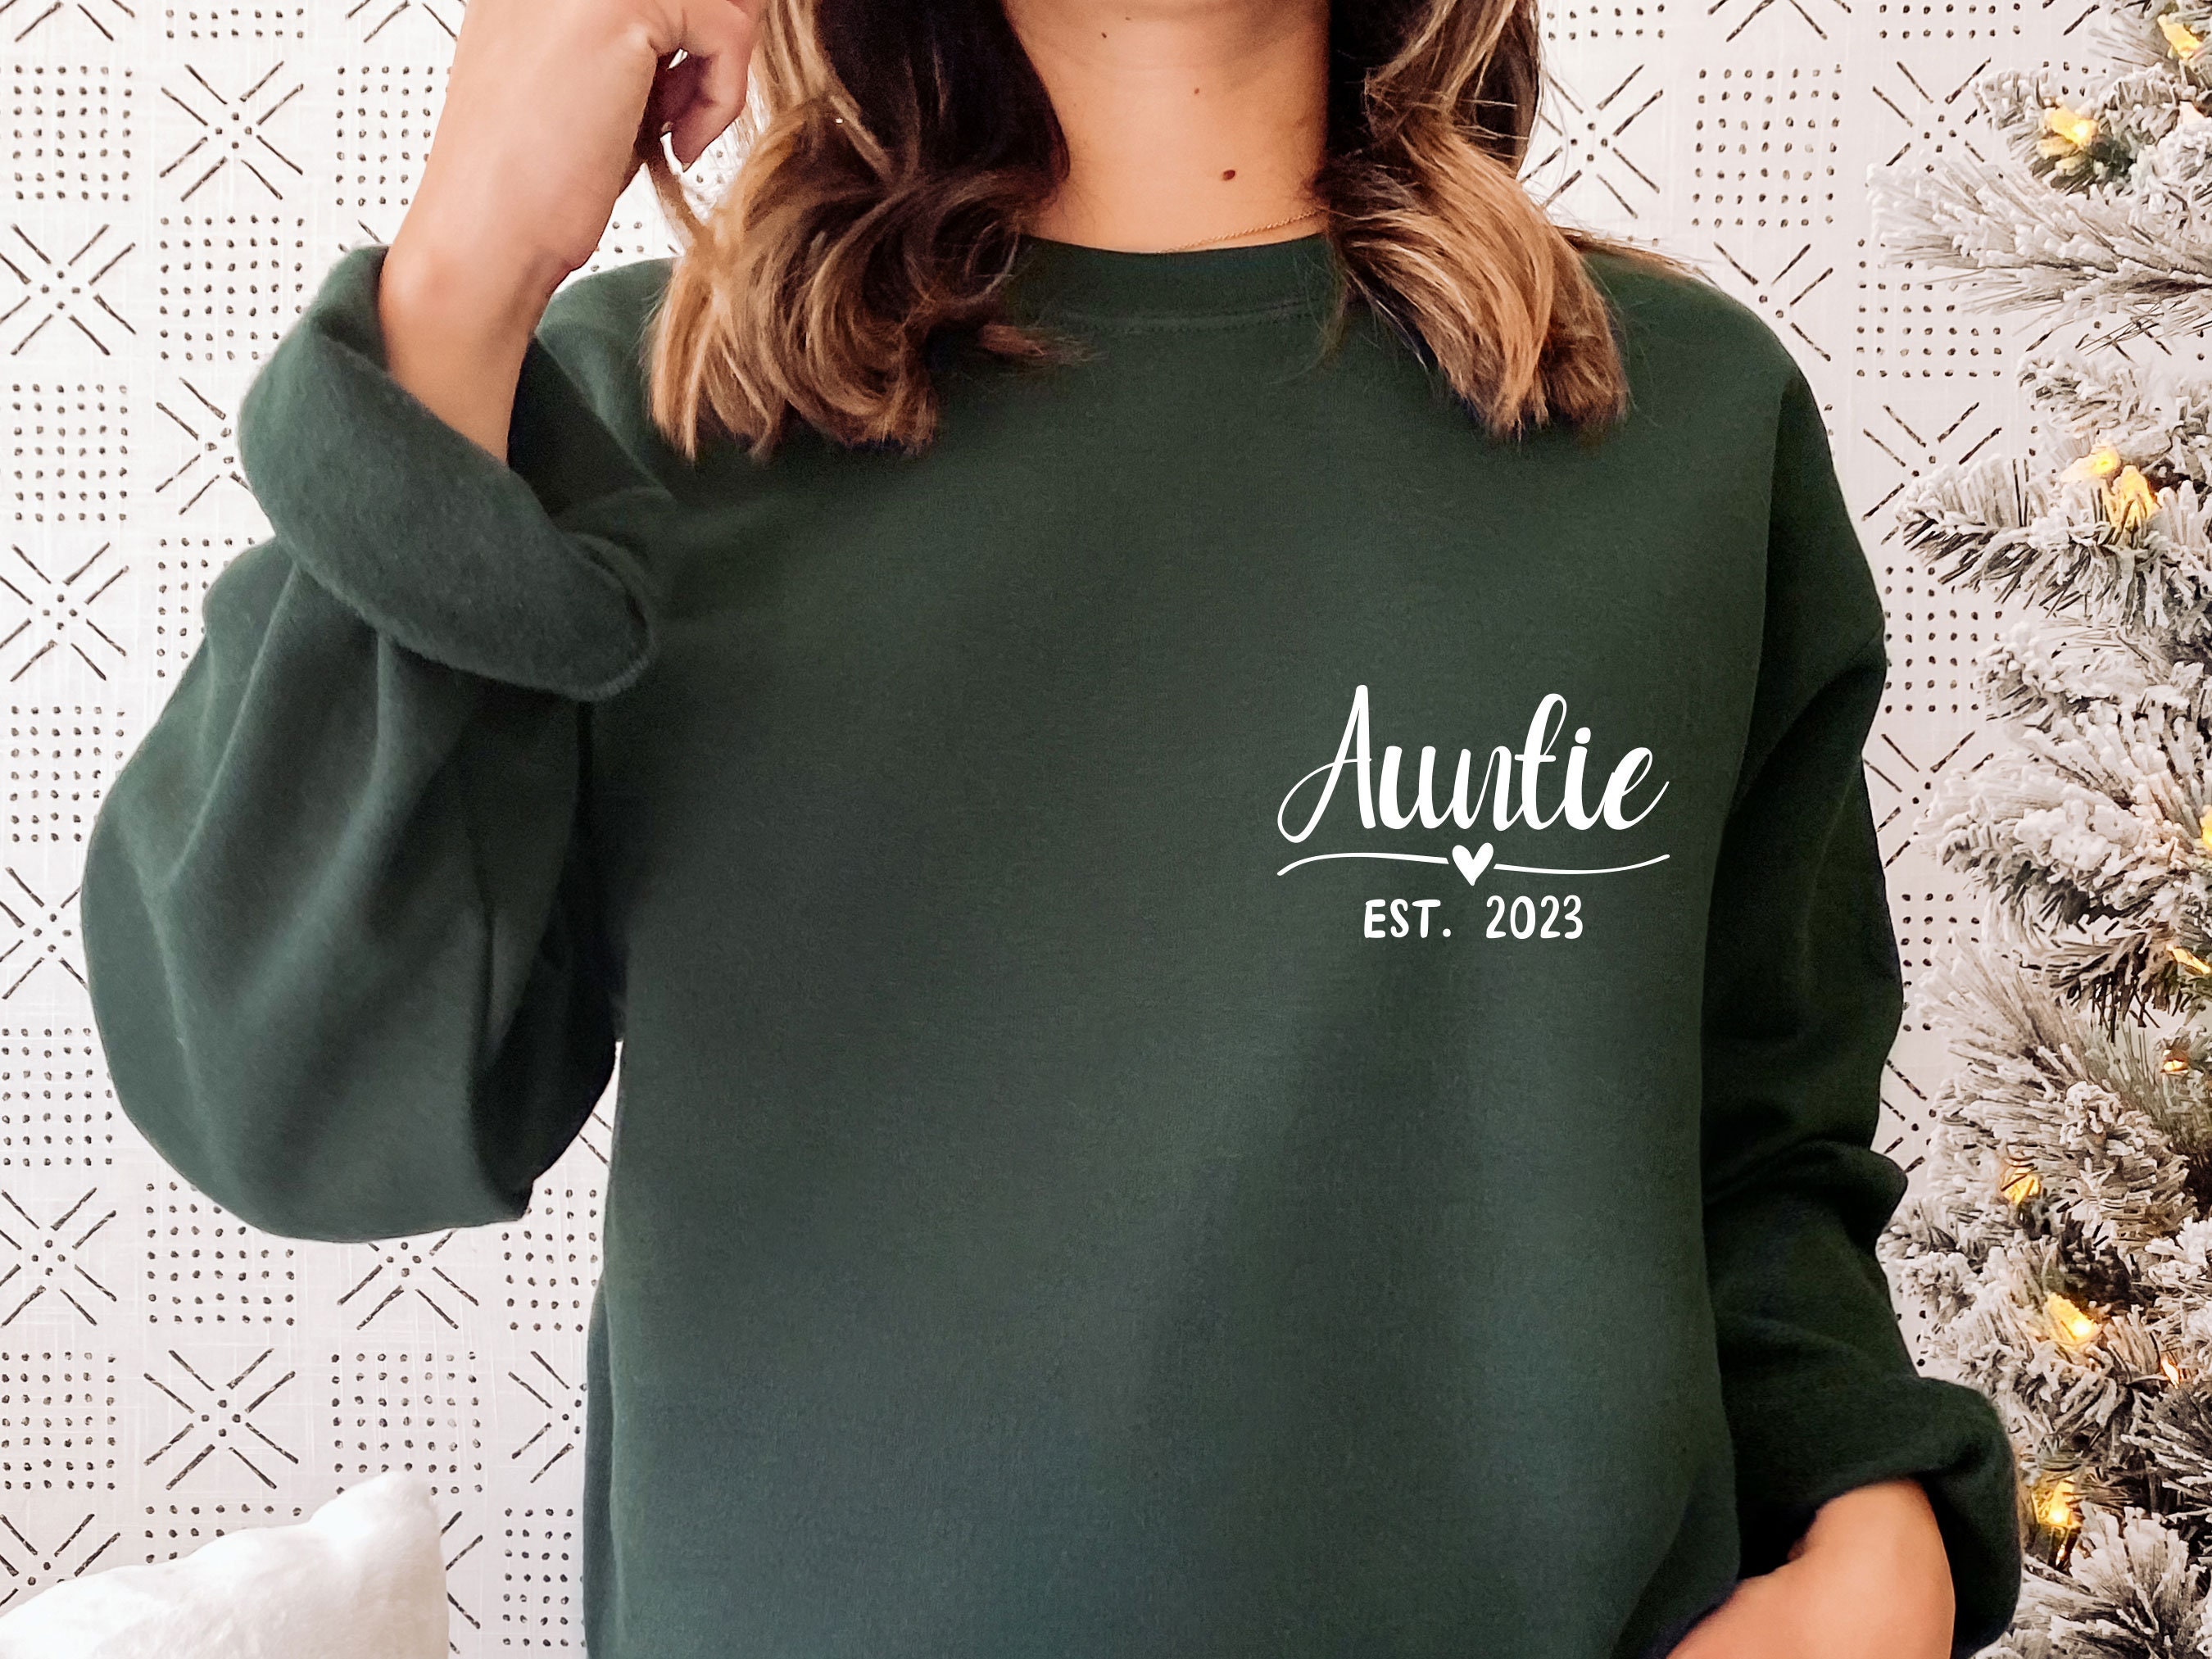 Auntie Sweatshirt, Custom Sweater, Cute Gifts, Personalised Auntie, New Gift, Best Aunt Mothers Day Top, Top